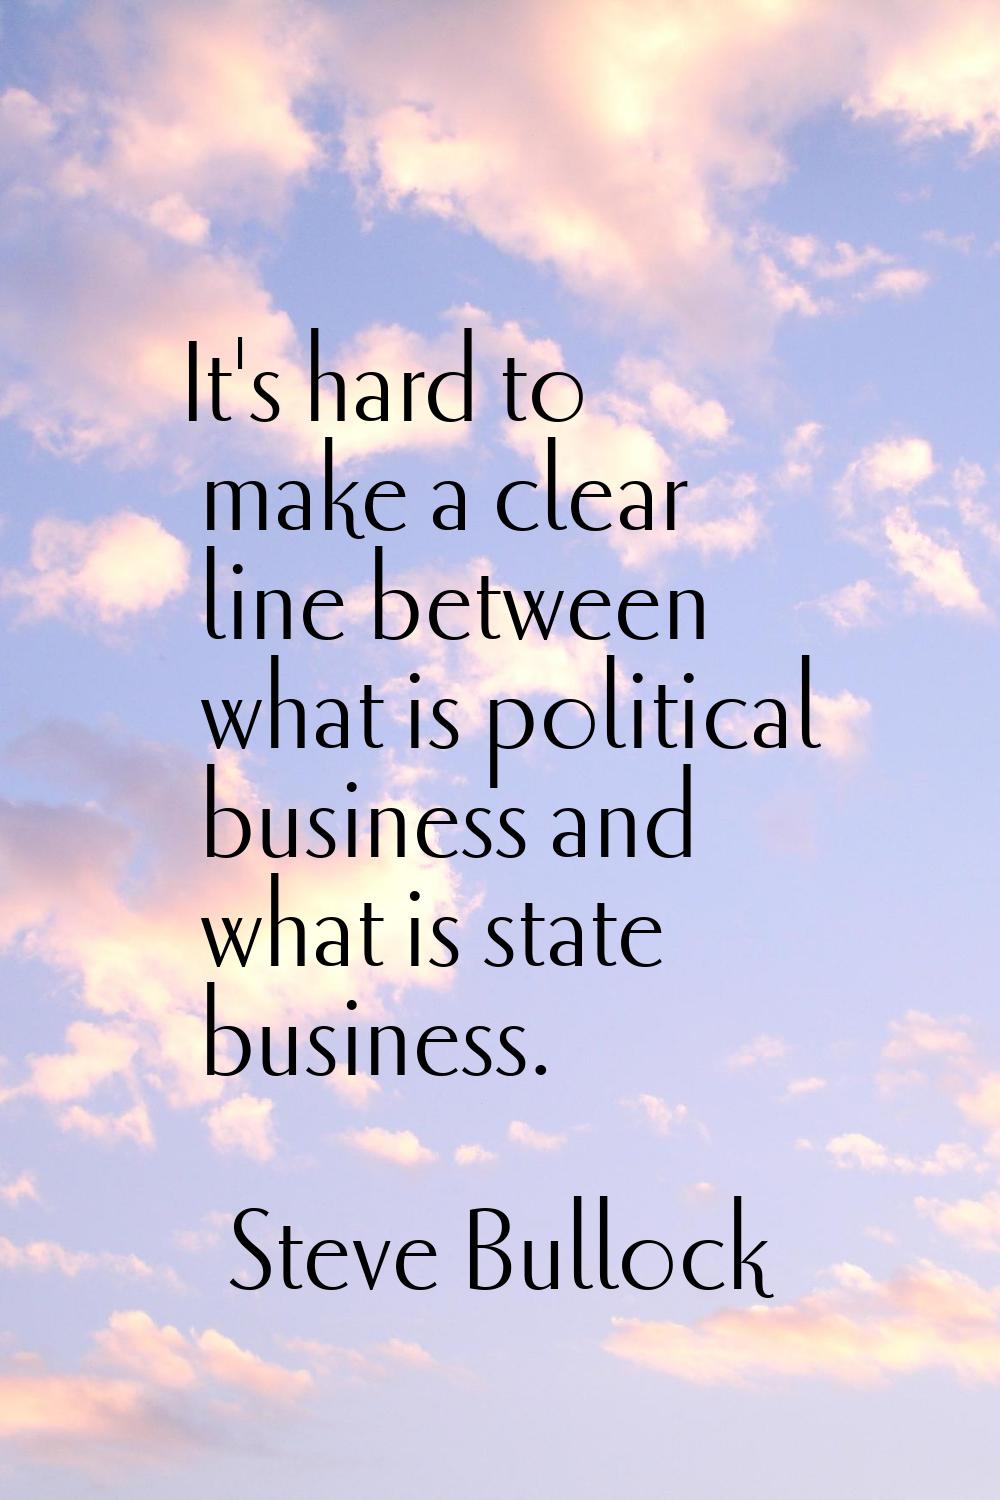 It's hard to make a clear line between what is political business and what is state business.